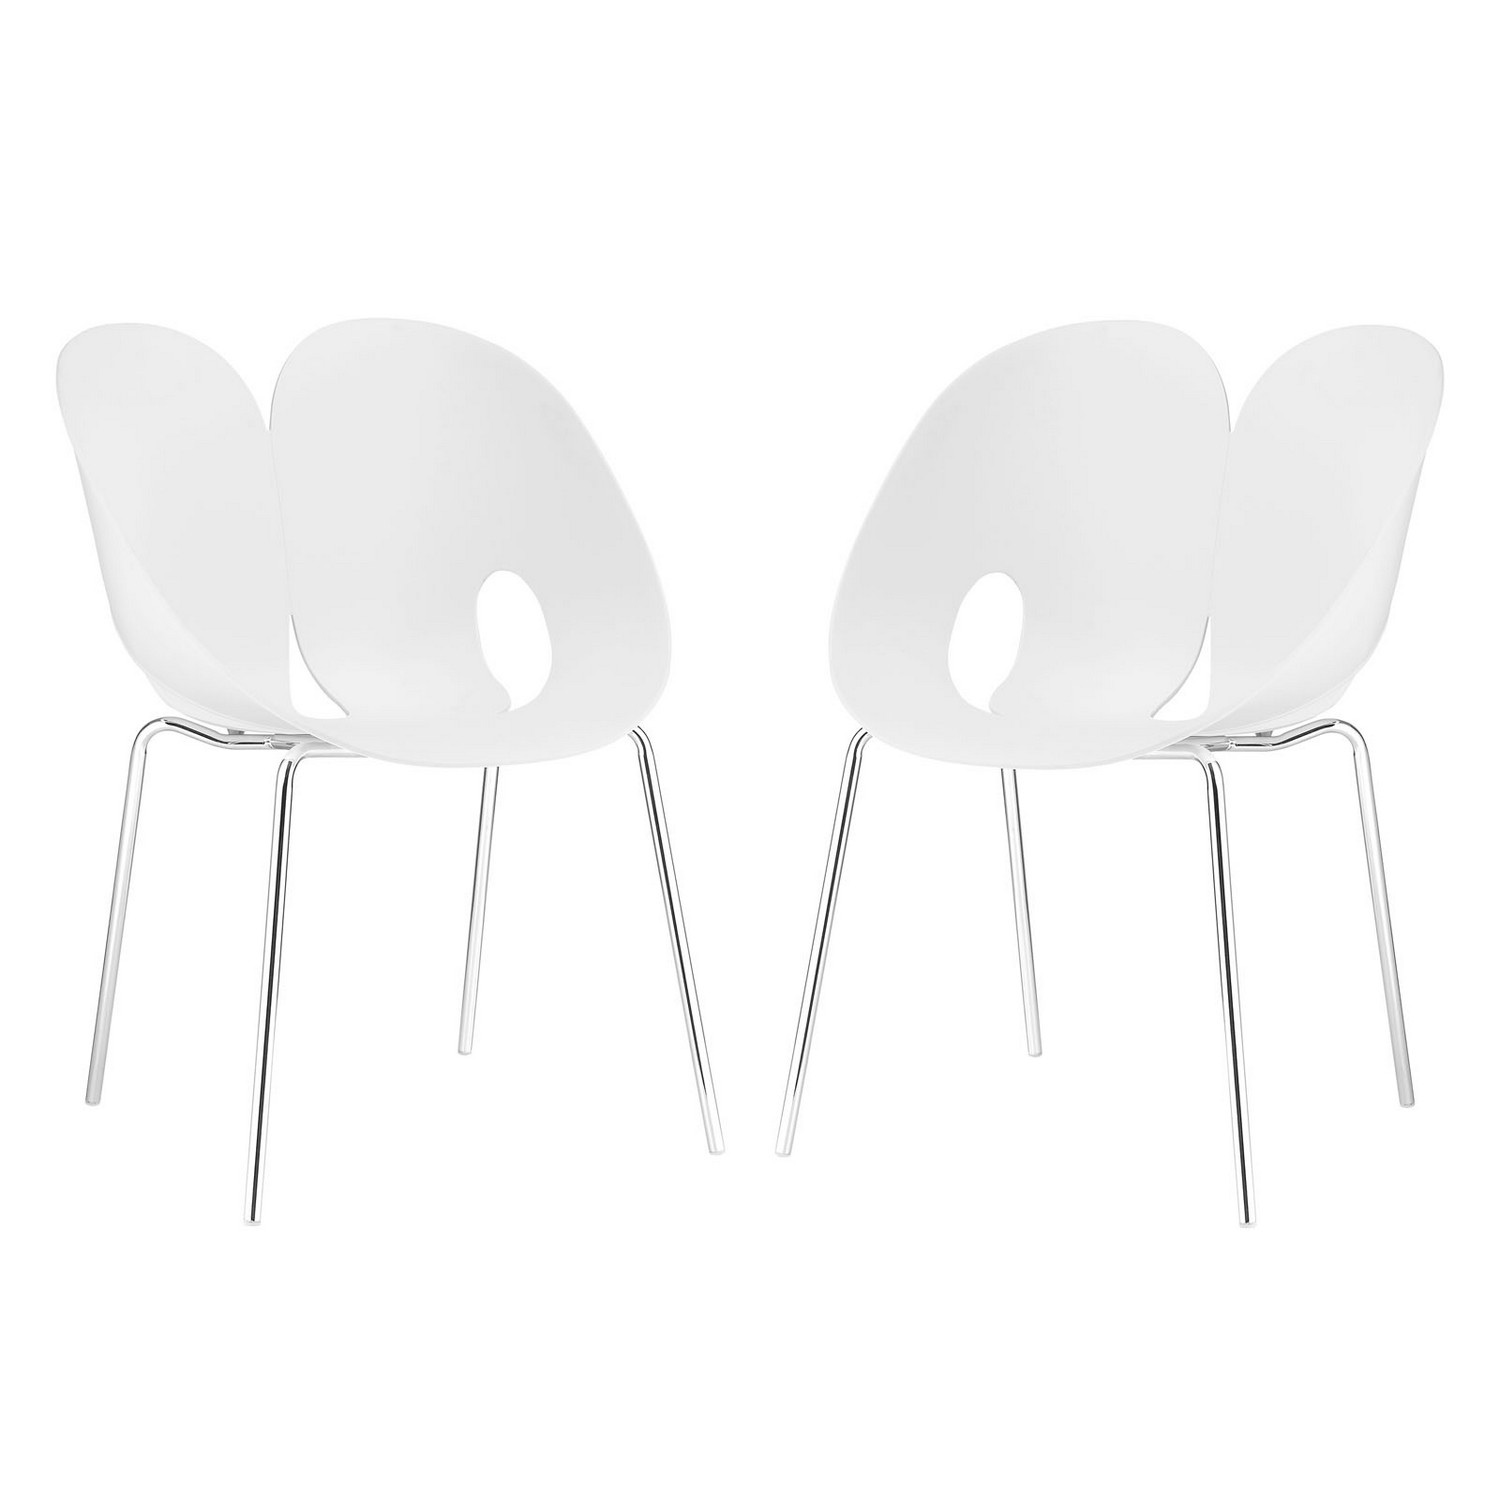 Modway Envelope Dining Chair - Set of 2 - White